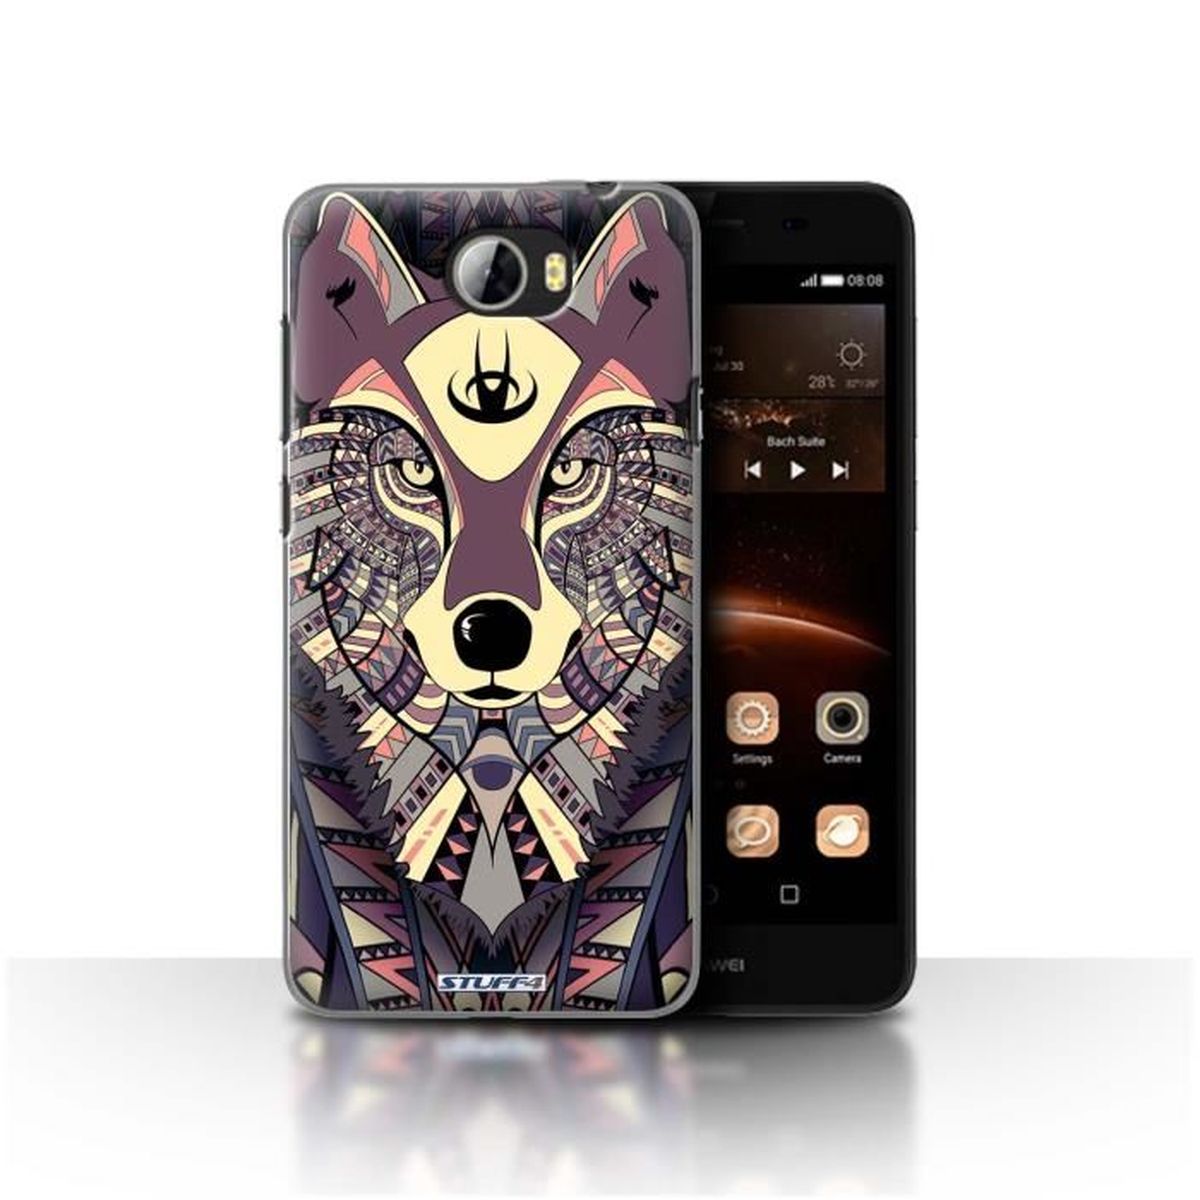 coque loup huawei y5 2019